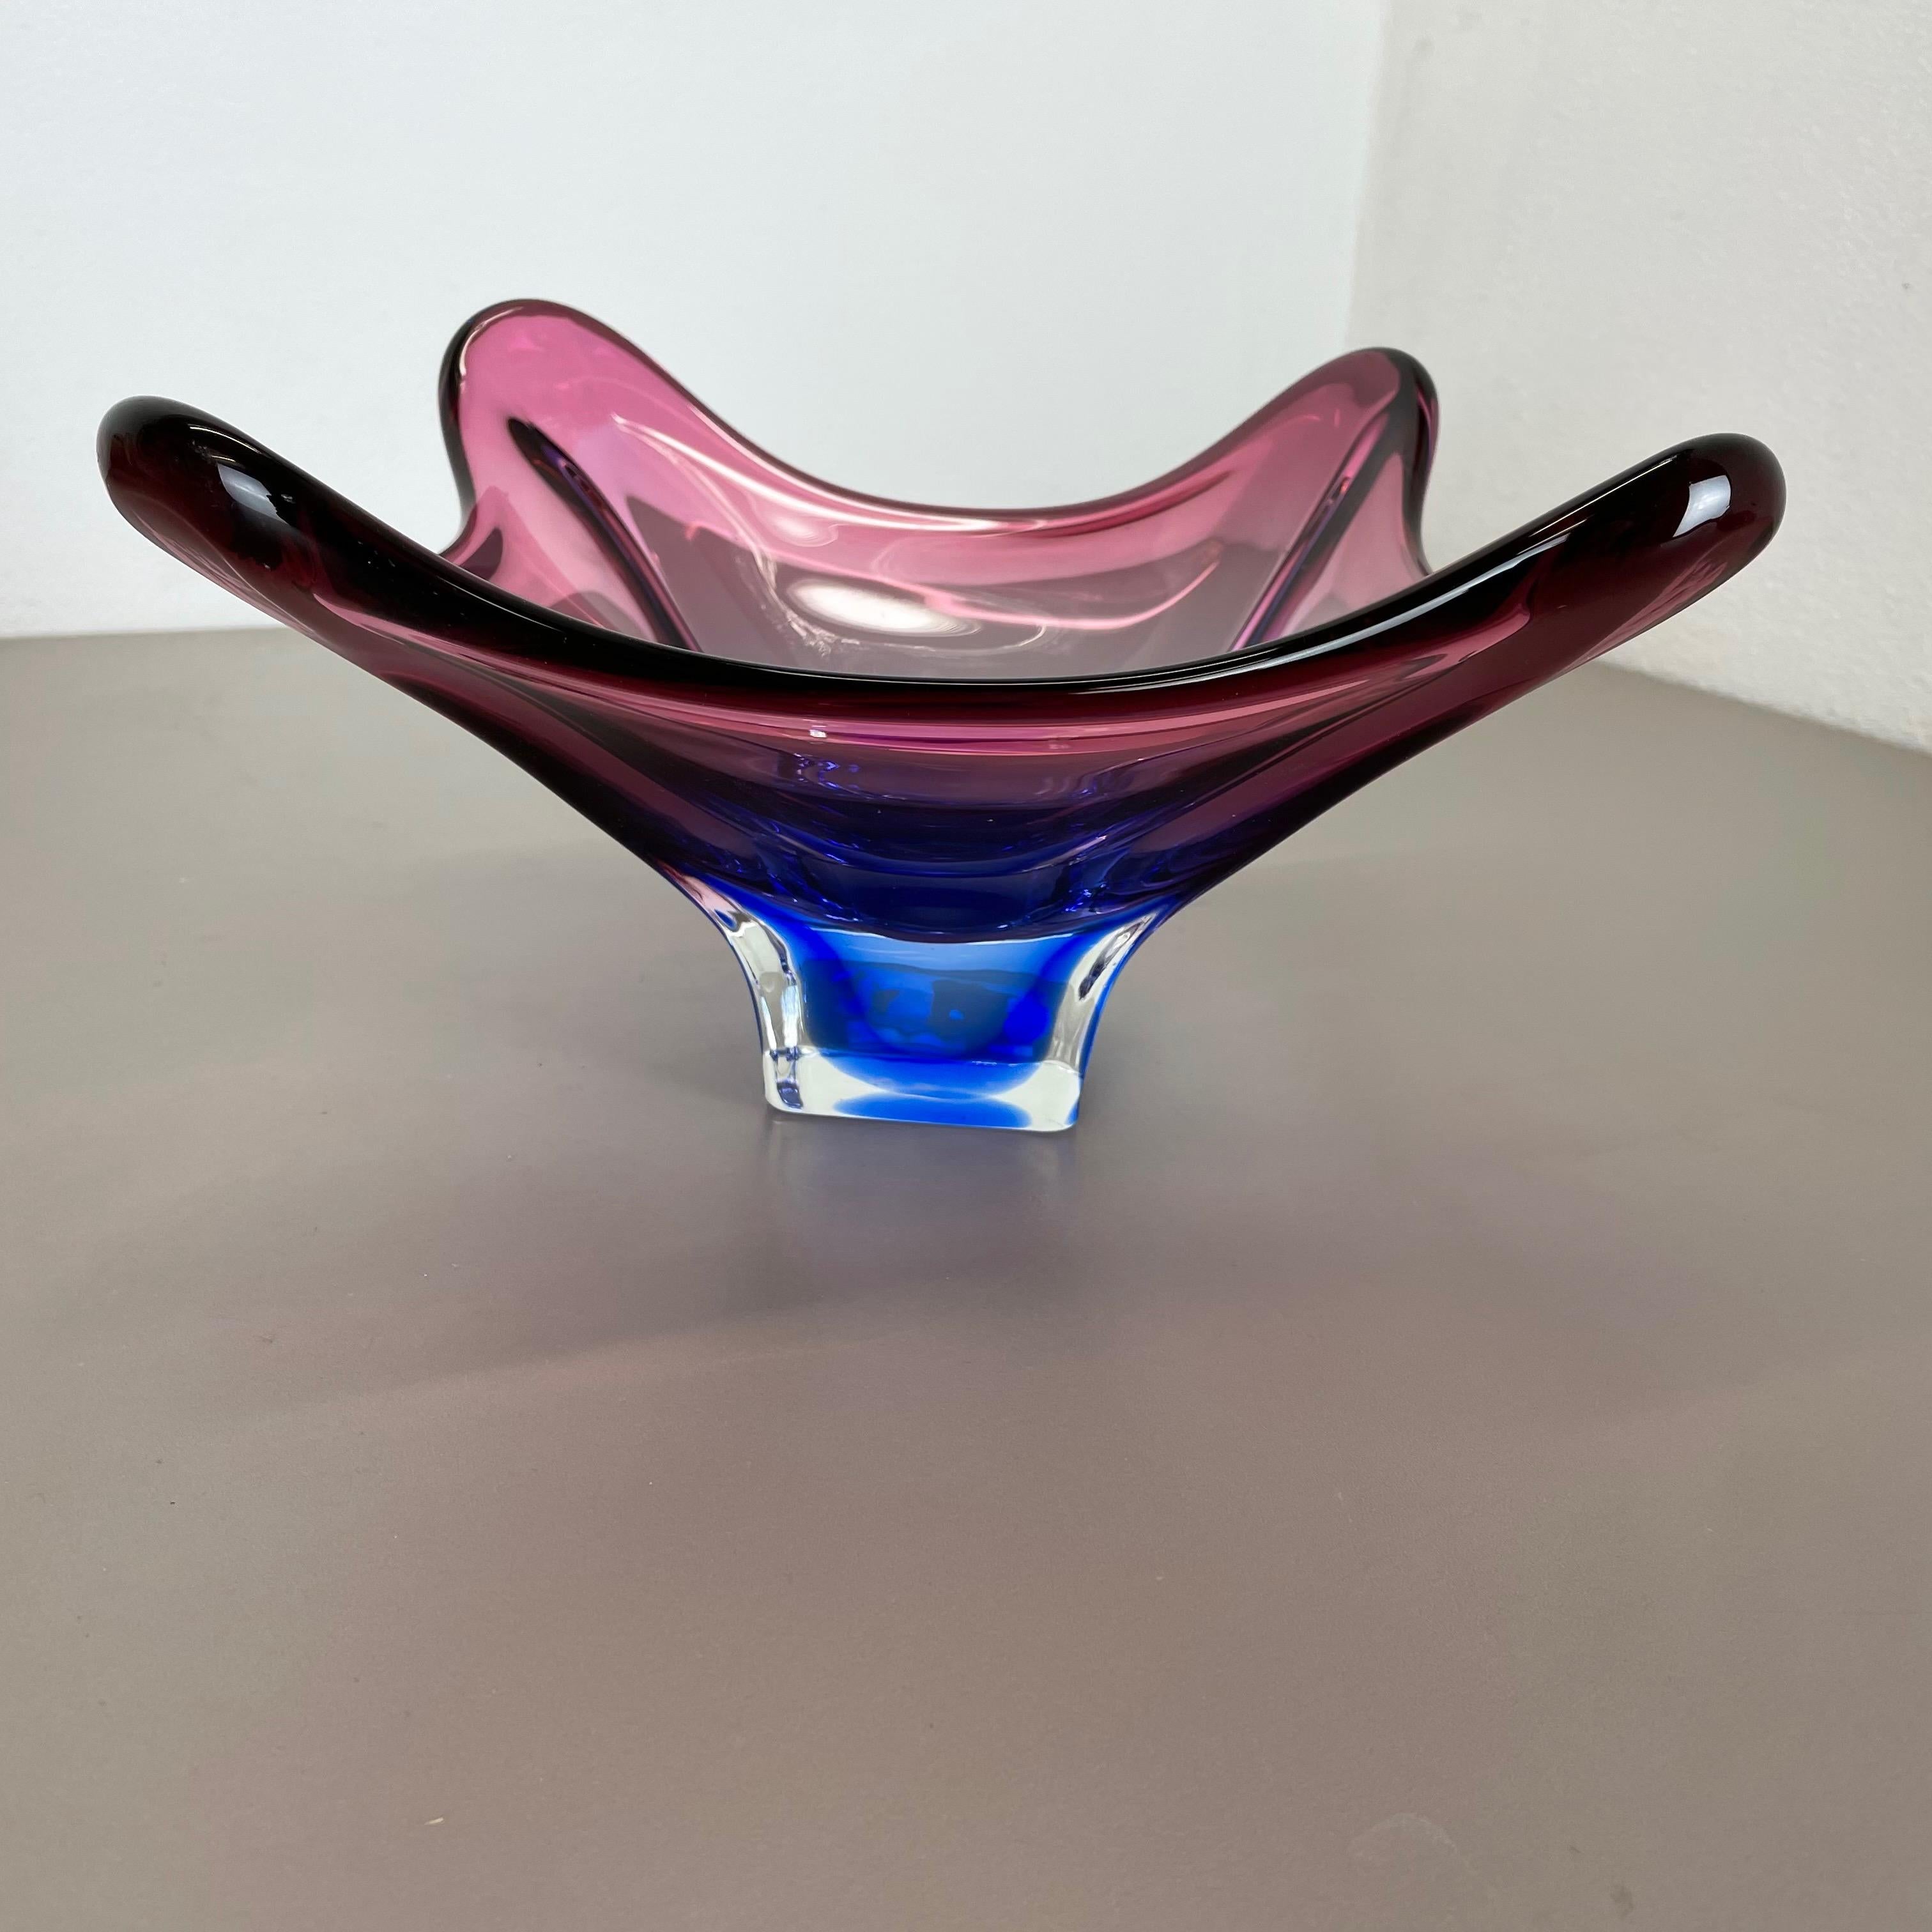 2 Kg Floral Glass Bowl Shell Centerpiece by Fratelli Toso Murano, Italy, 1970s For Sale 6